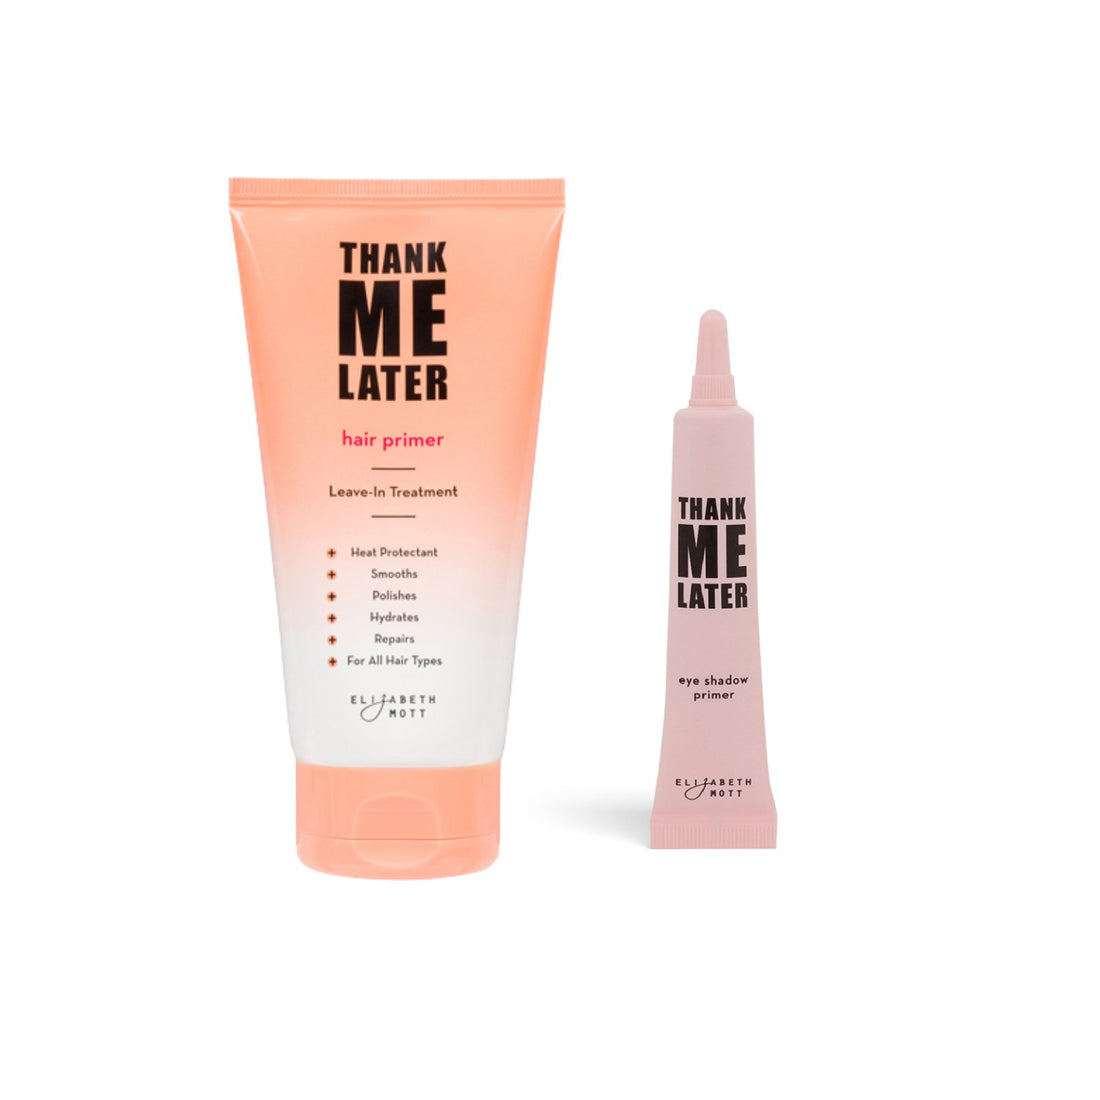 thank me later hair primer leave-in treatment + thank me later eye primer